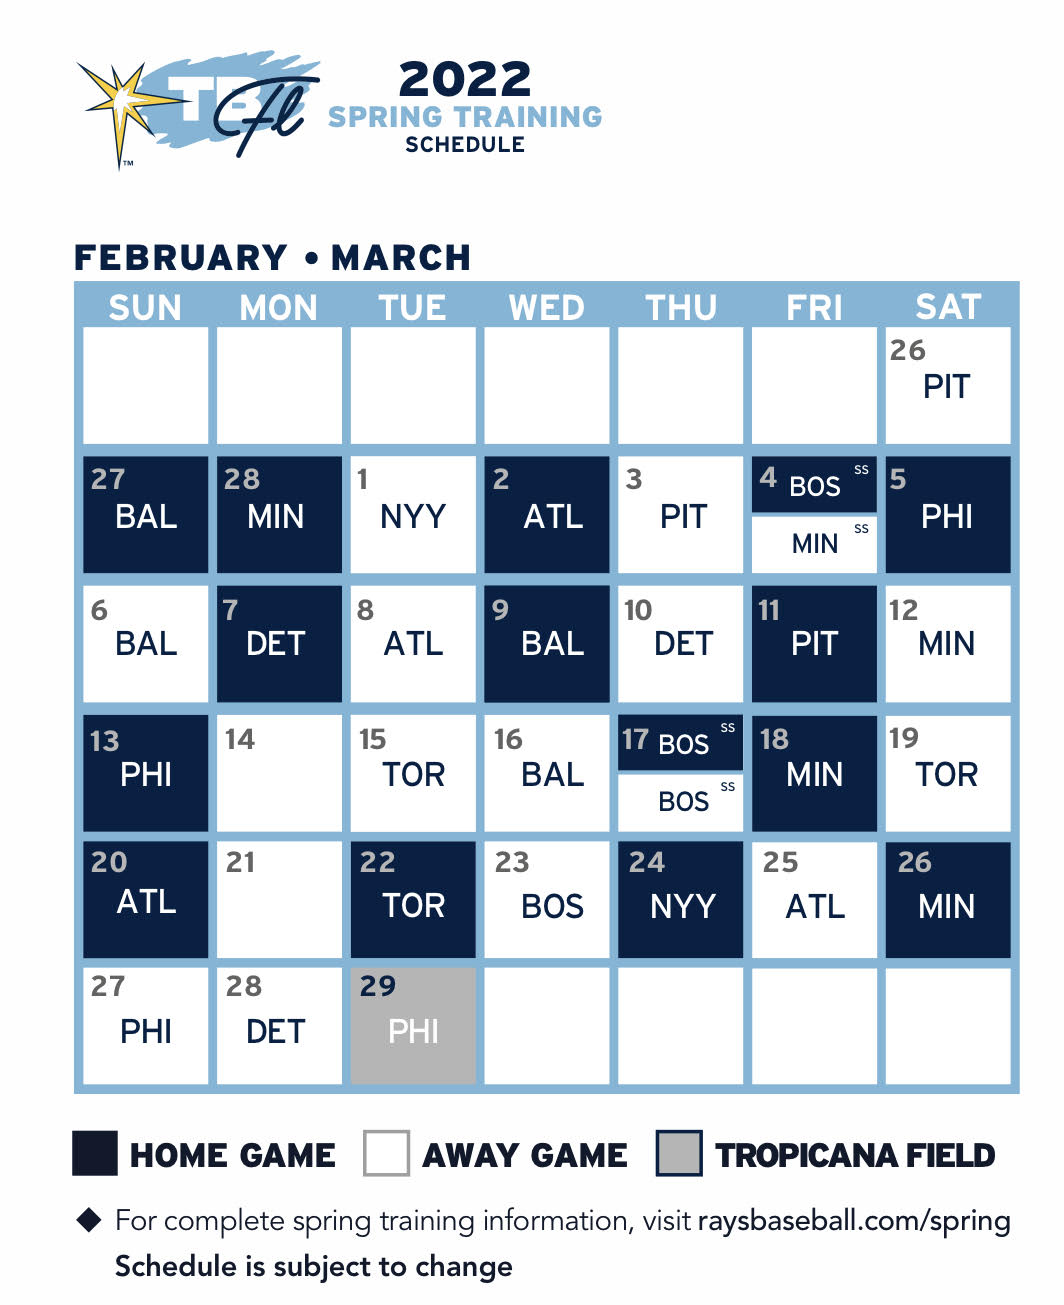 Rays release 2017 schedule